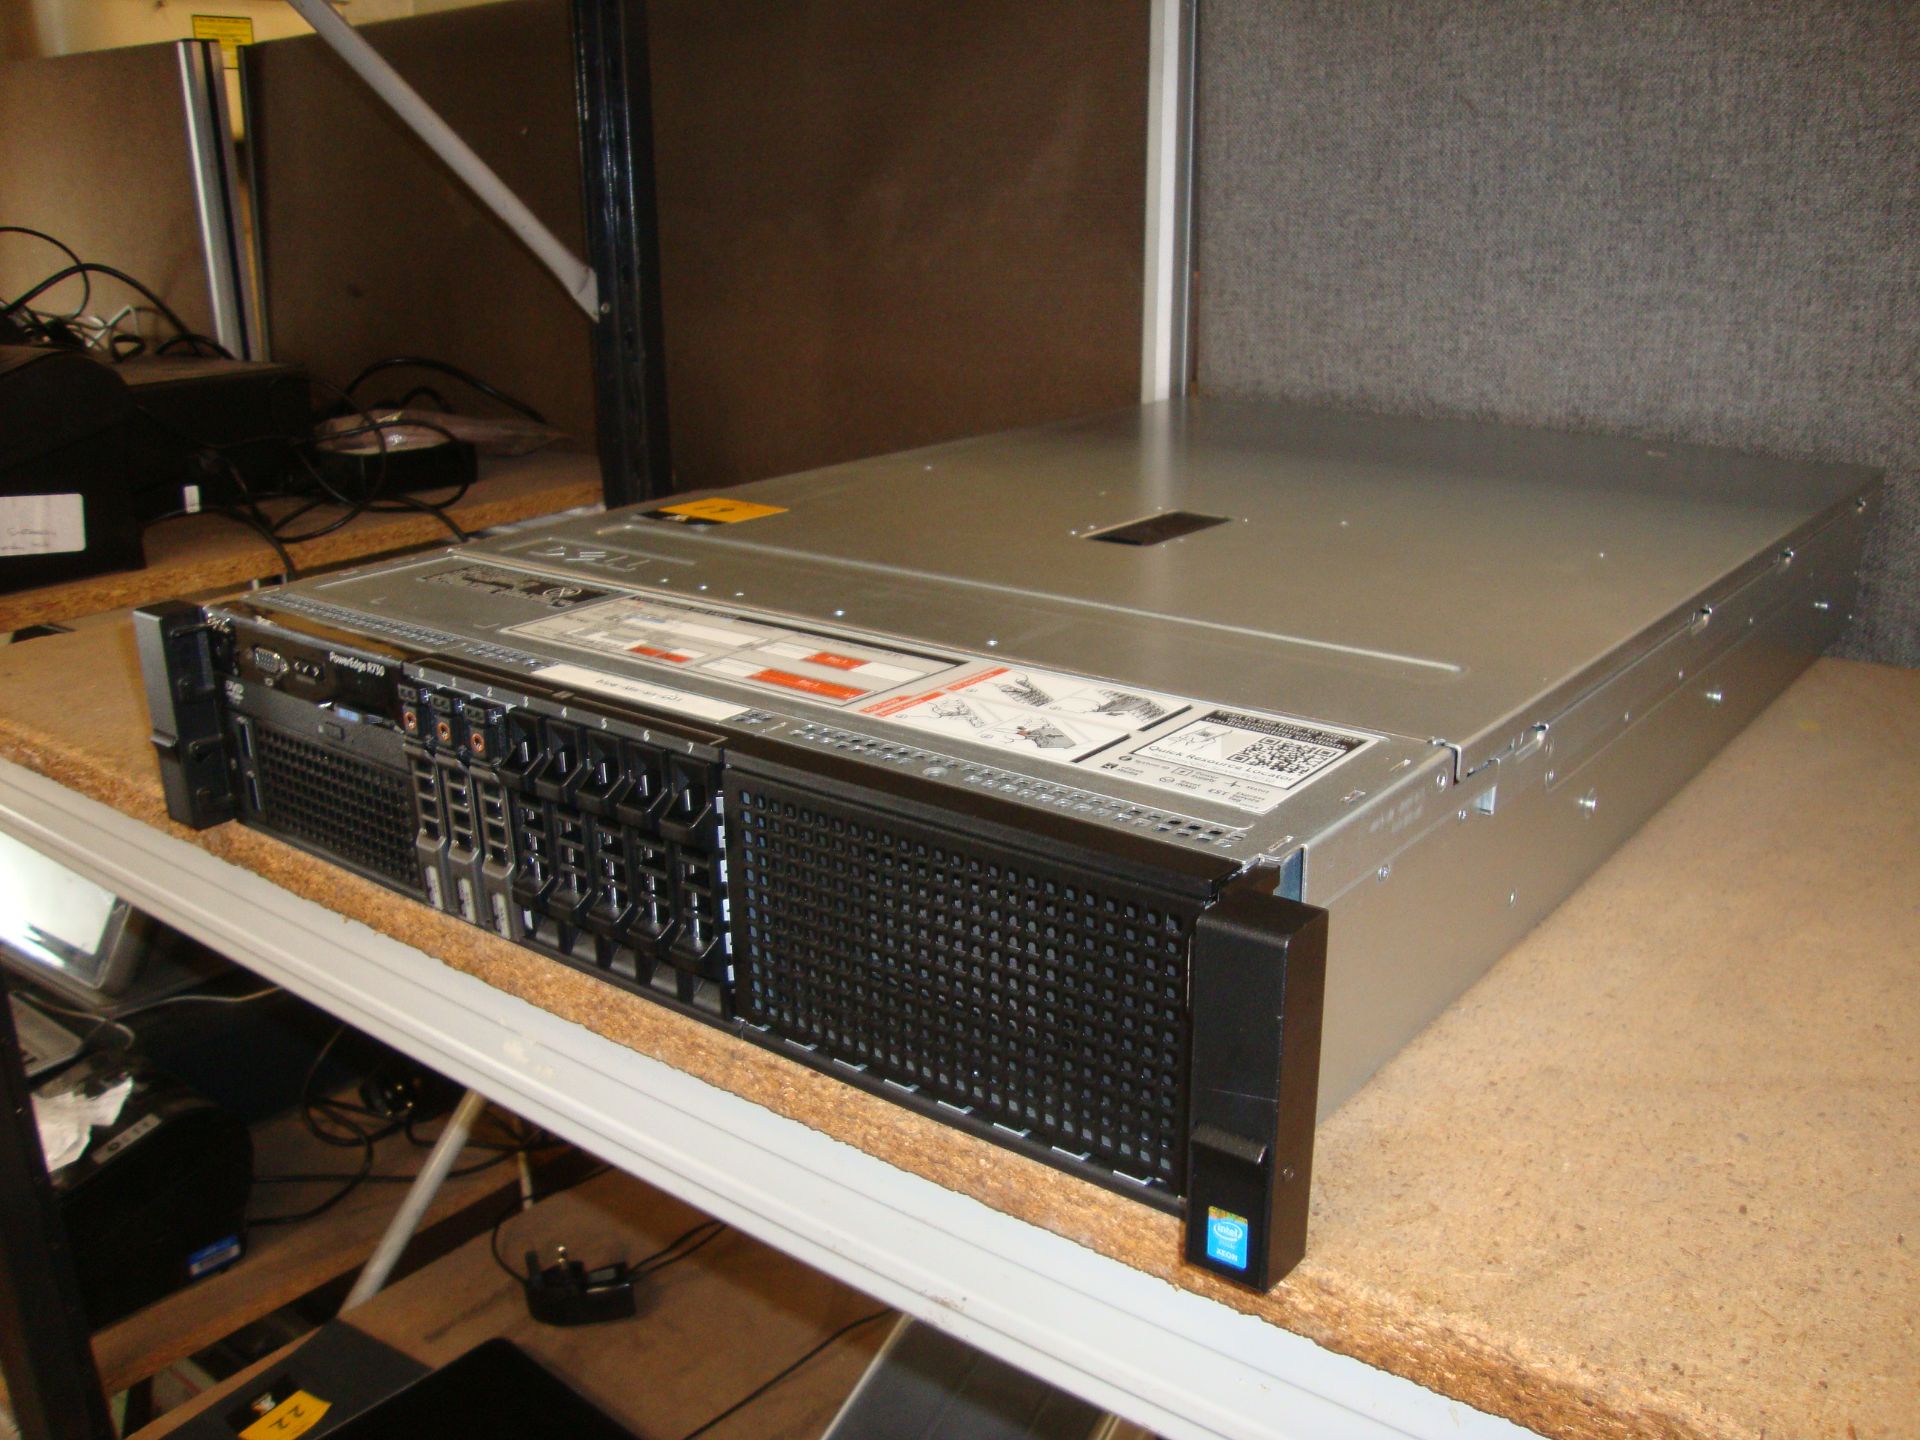 Dell PowerEdge model R730 server with twin Xeon 6 Core E5-2609 V3 1.9 GHz processors, 96Gb RAM, - Image 2 of 15